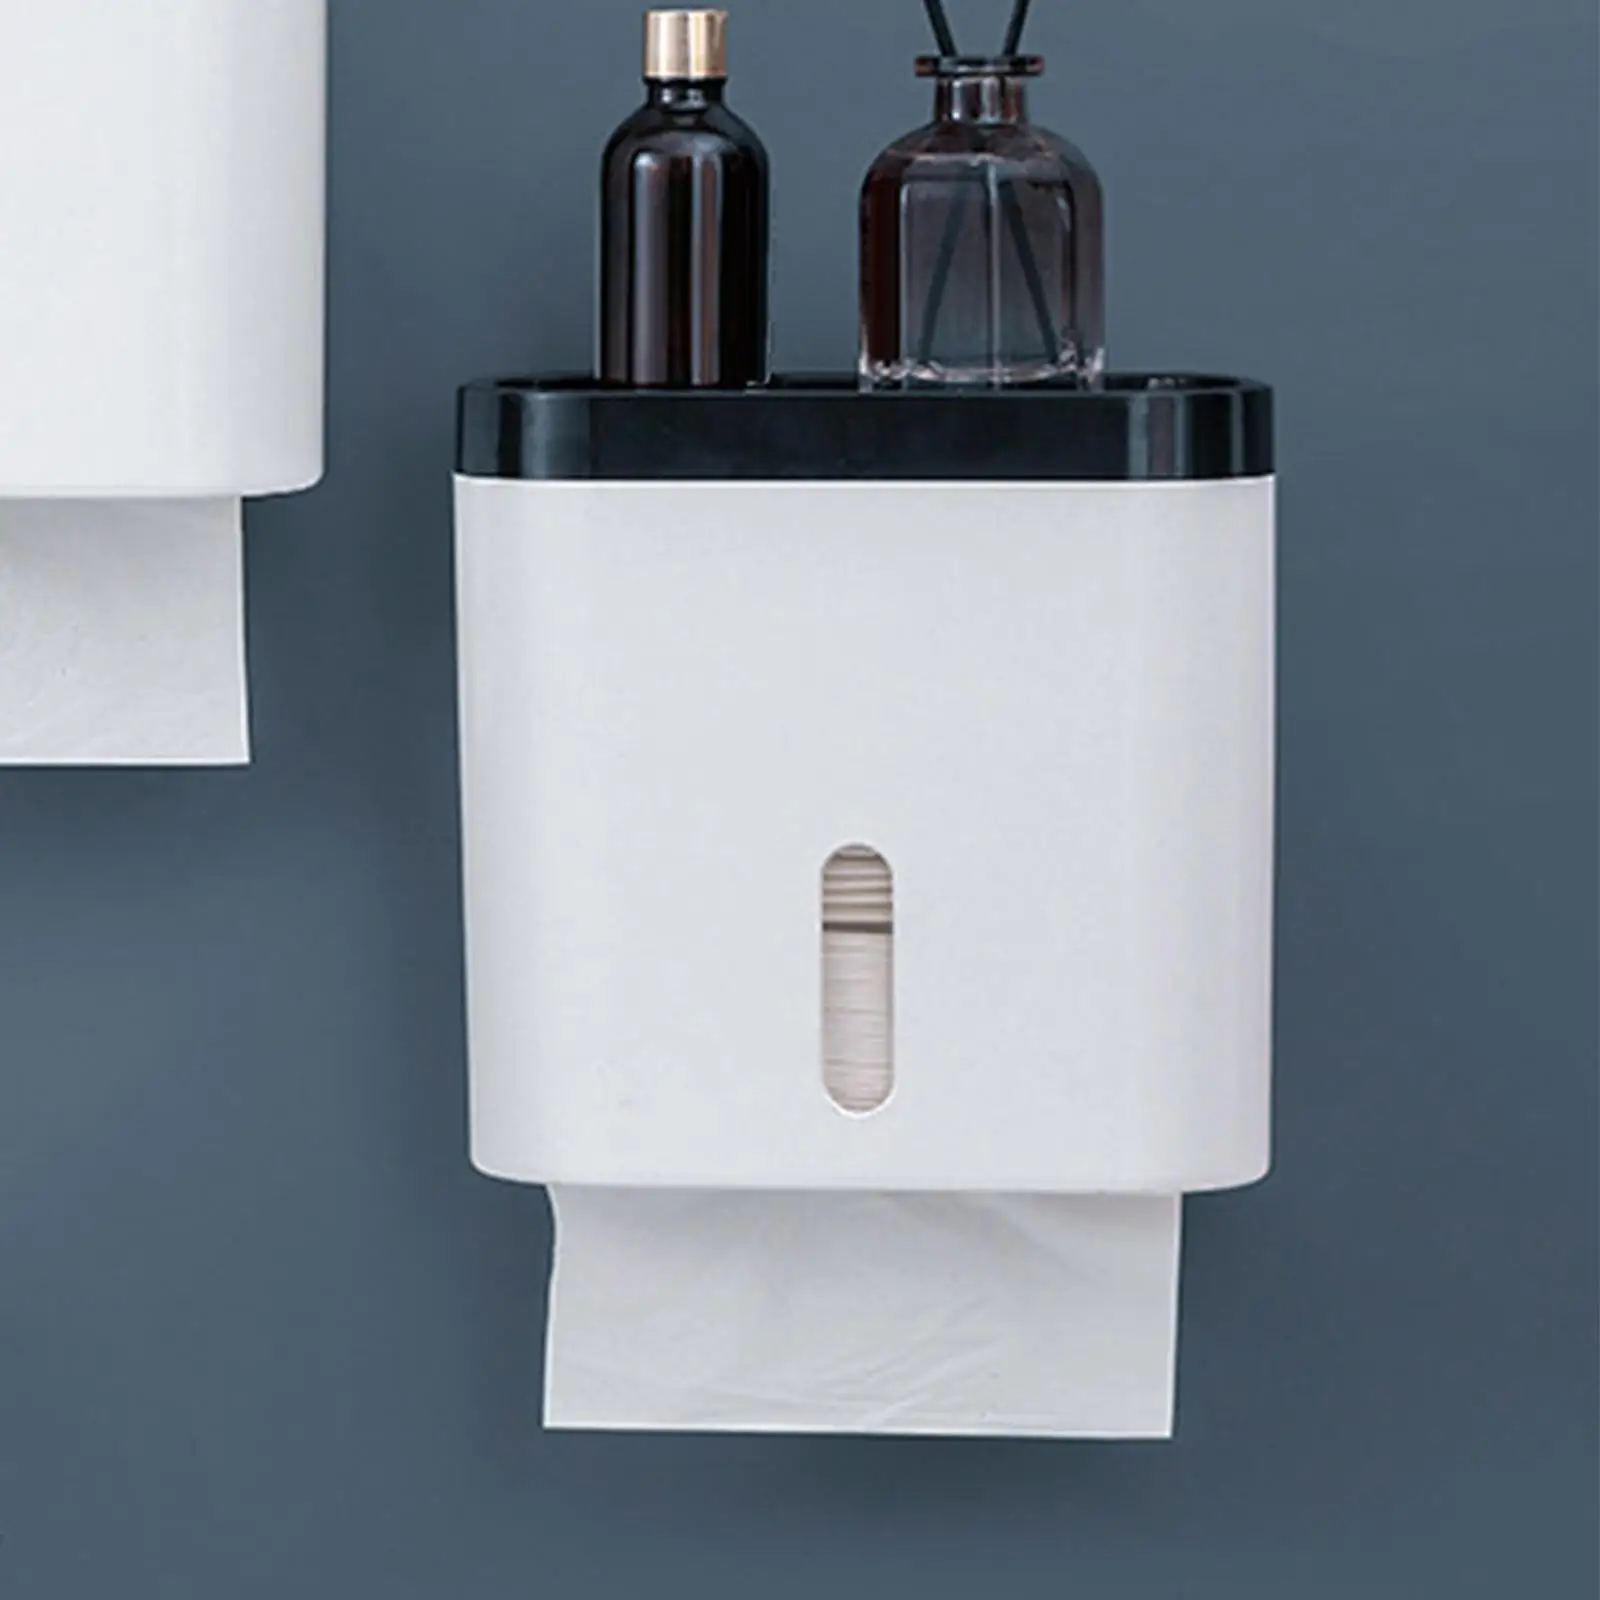 Punch Free Paper Holder with Shelf Toilet Roll Holders Bathroom Accessories